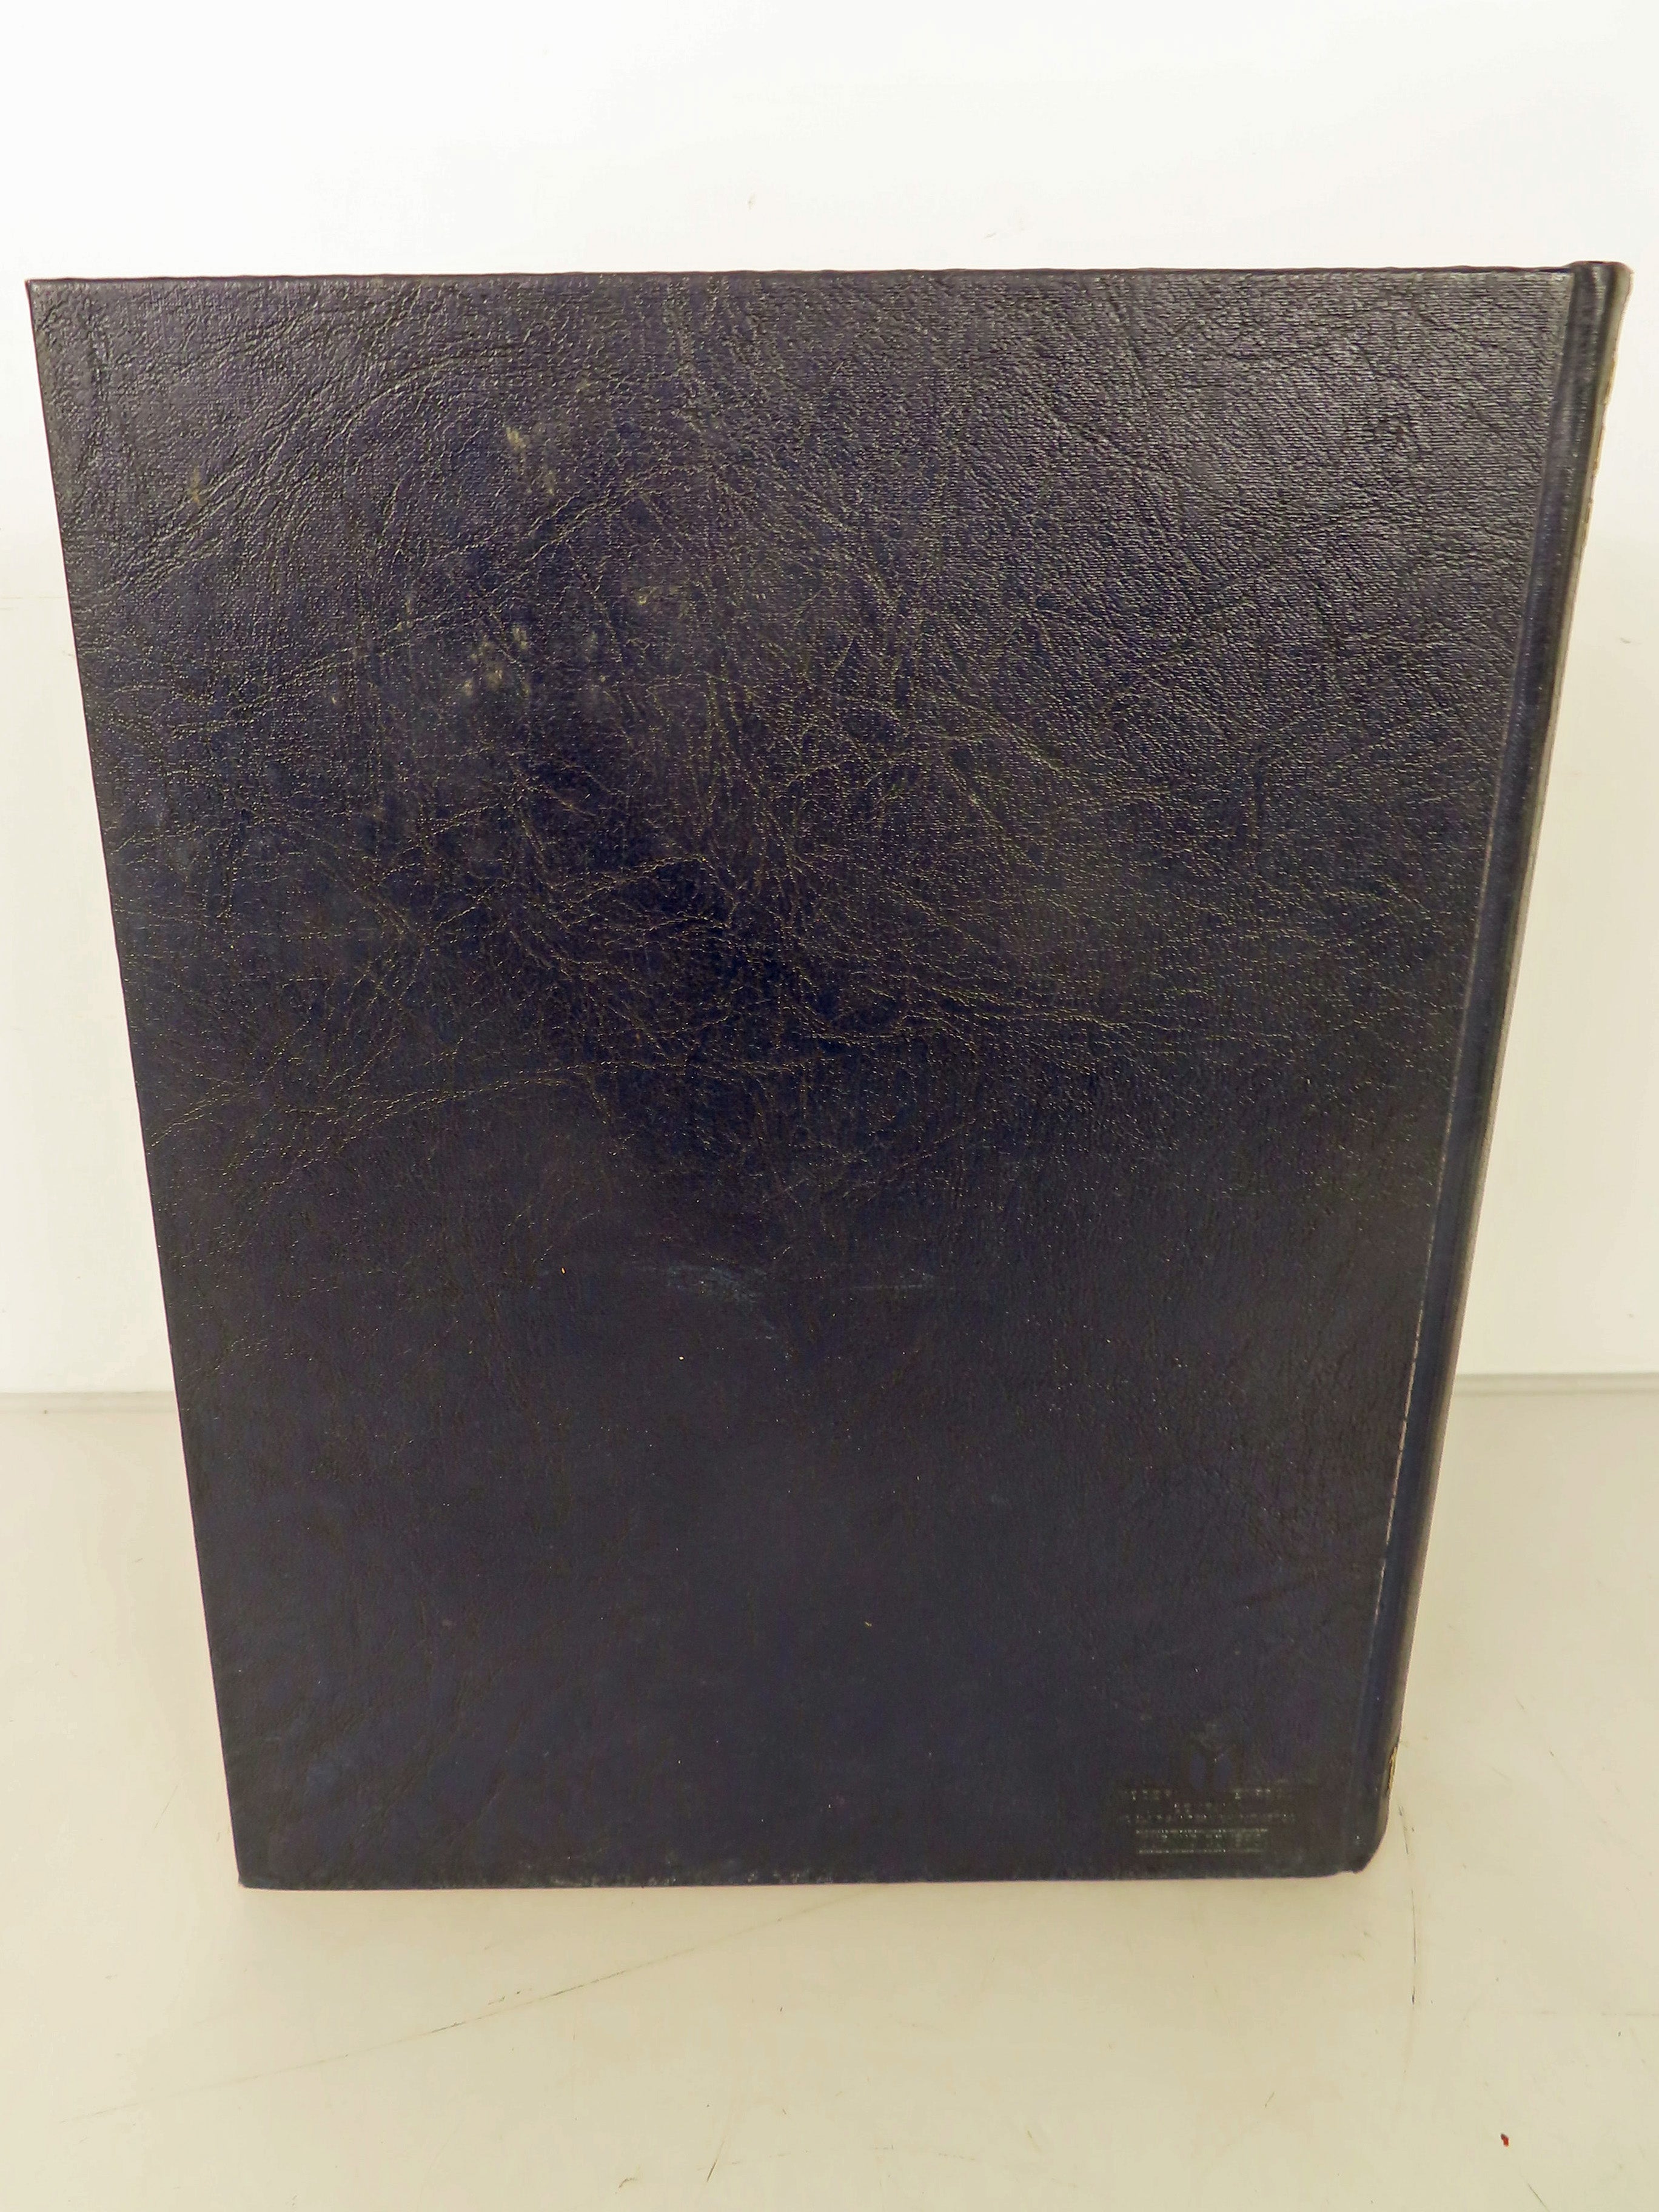 Blue and Gold 1971 Detroit Country Day School Yearbook Birmingham Michigan